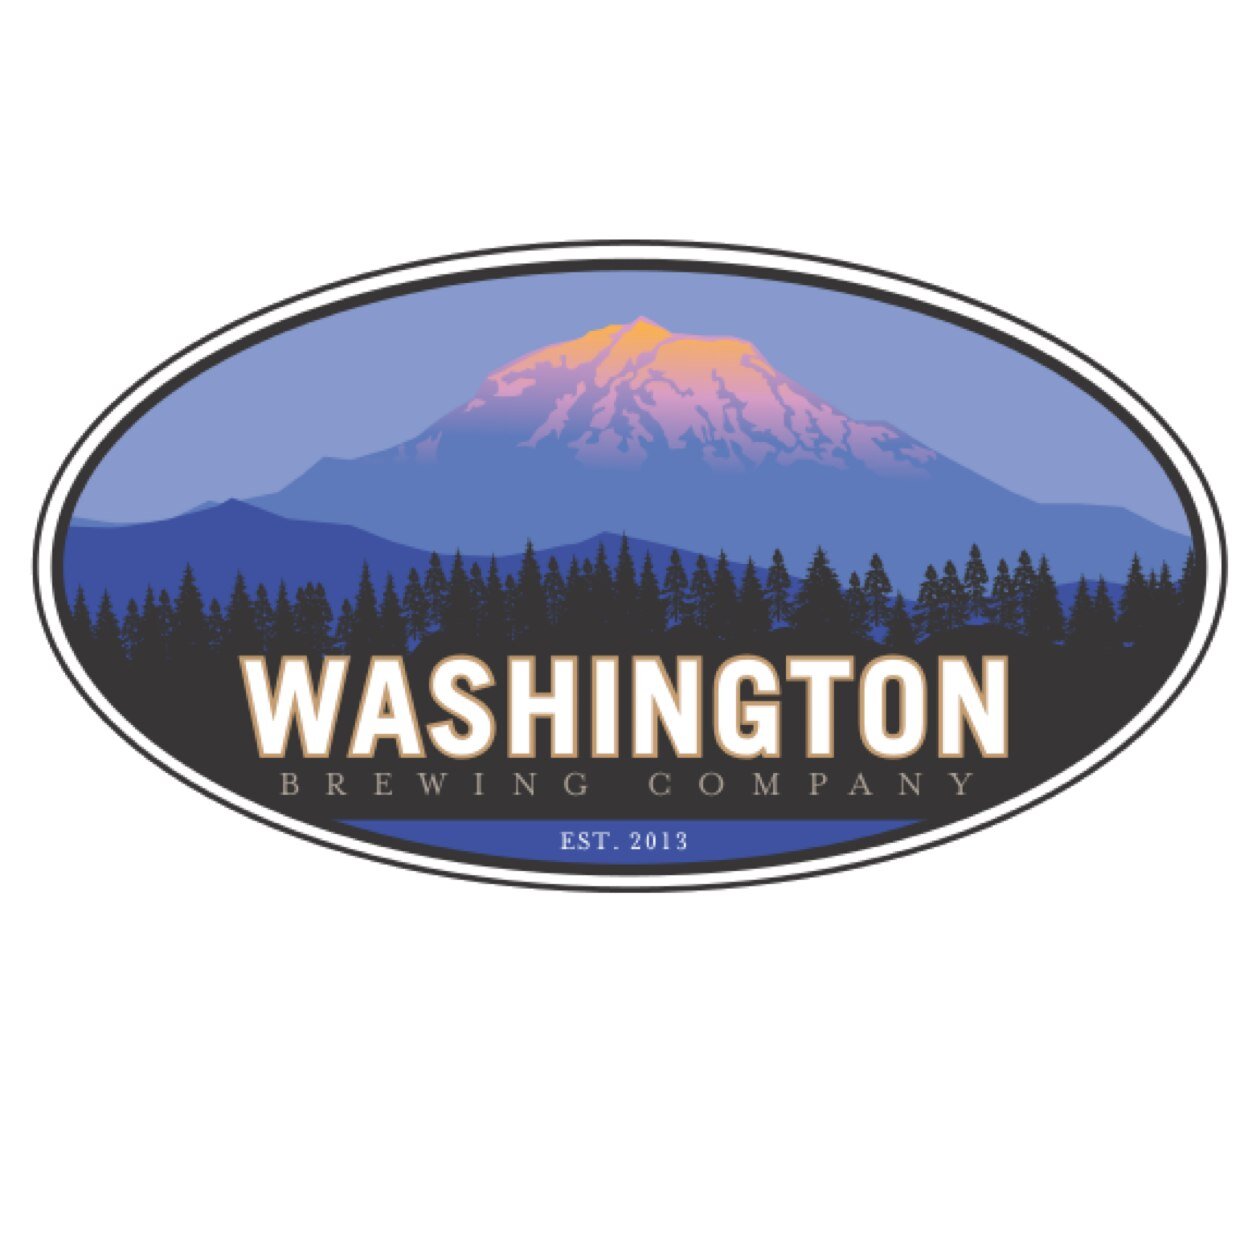 - Washington Brewing Company - Blue Collar Brew Artisans. Brewery to open early 2015